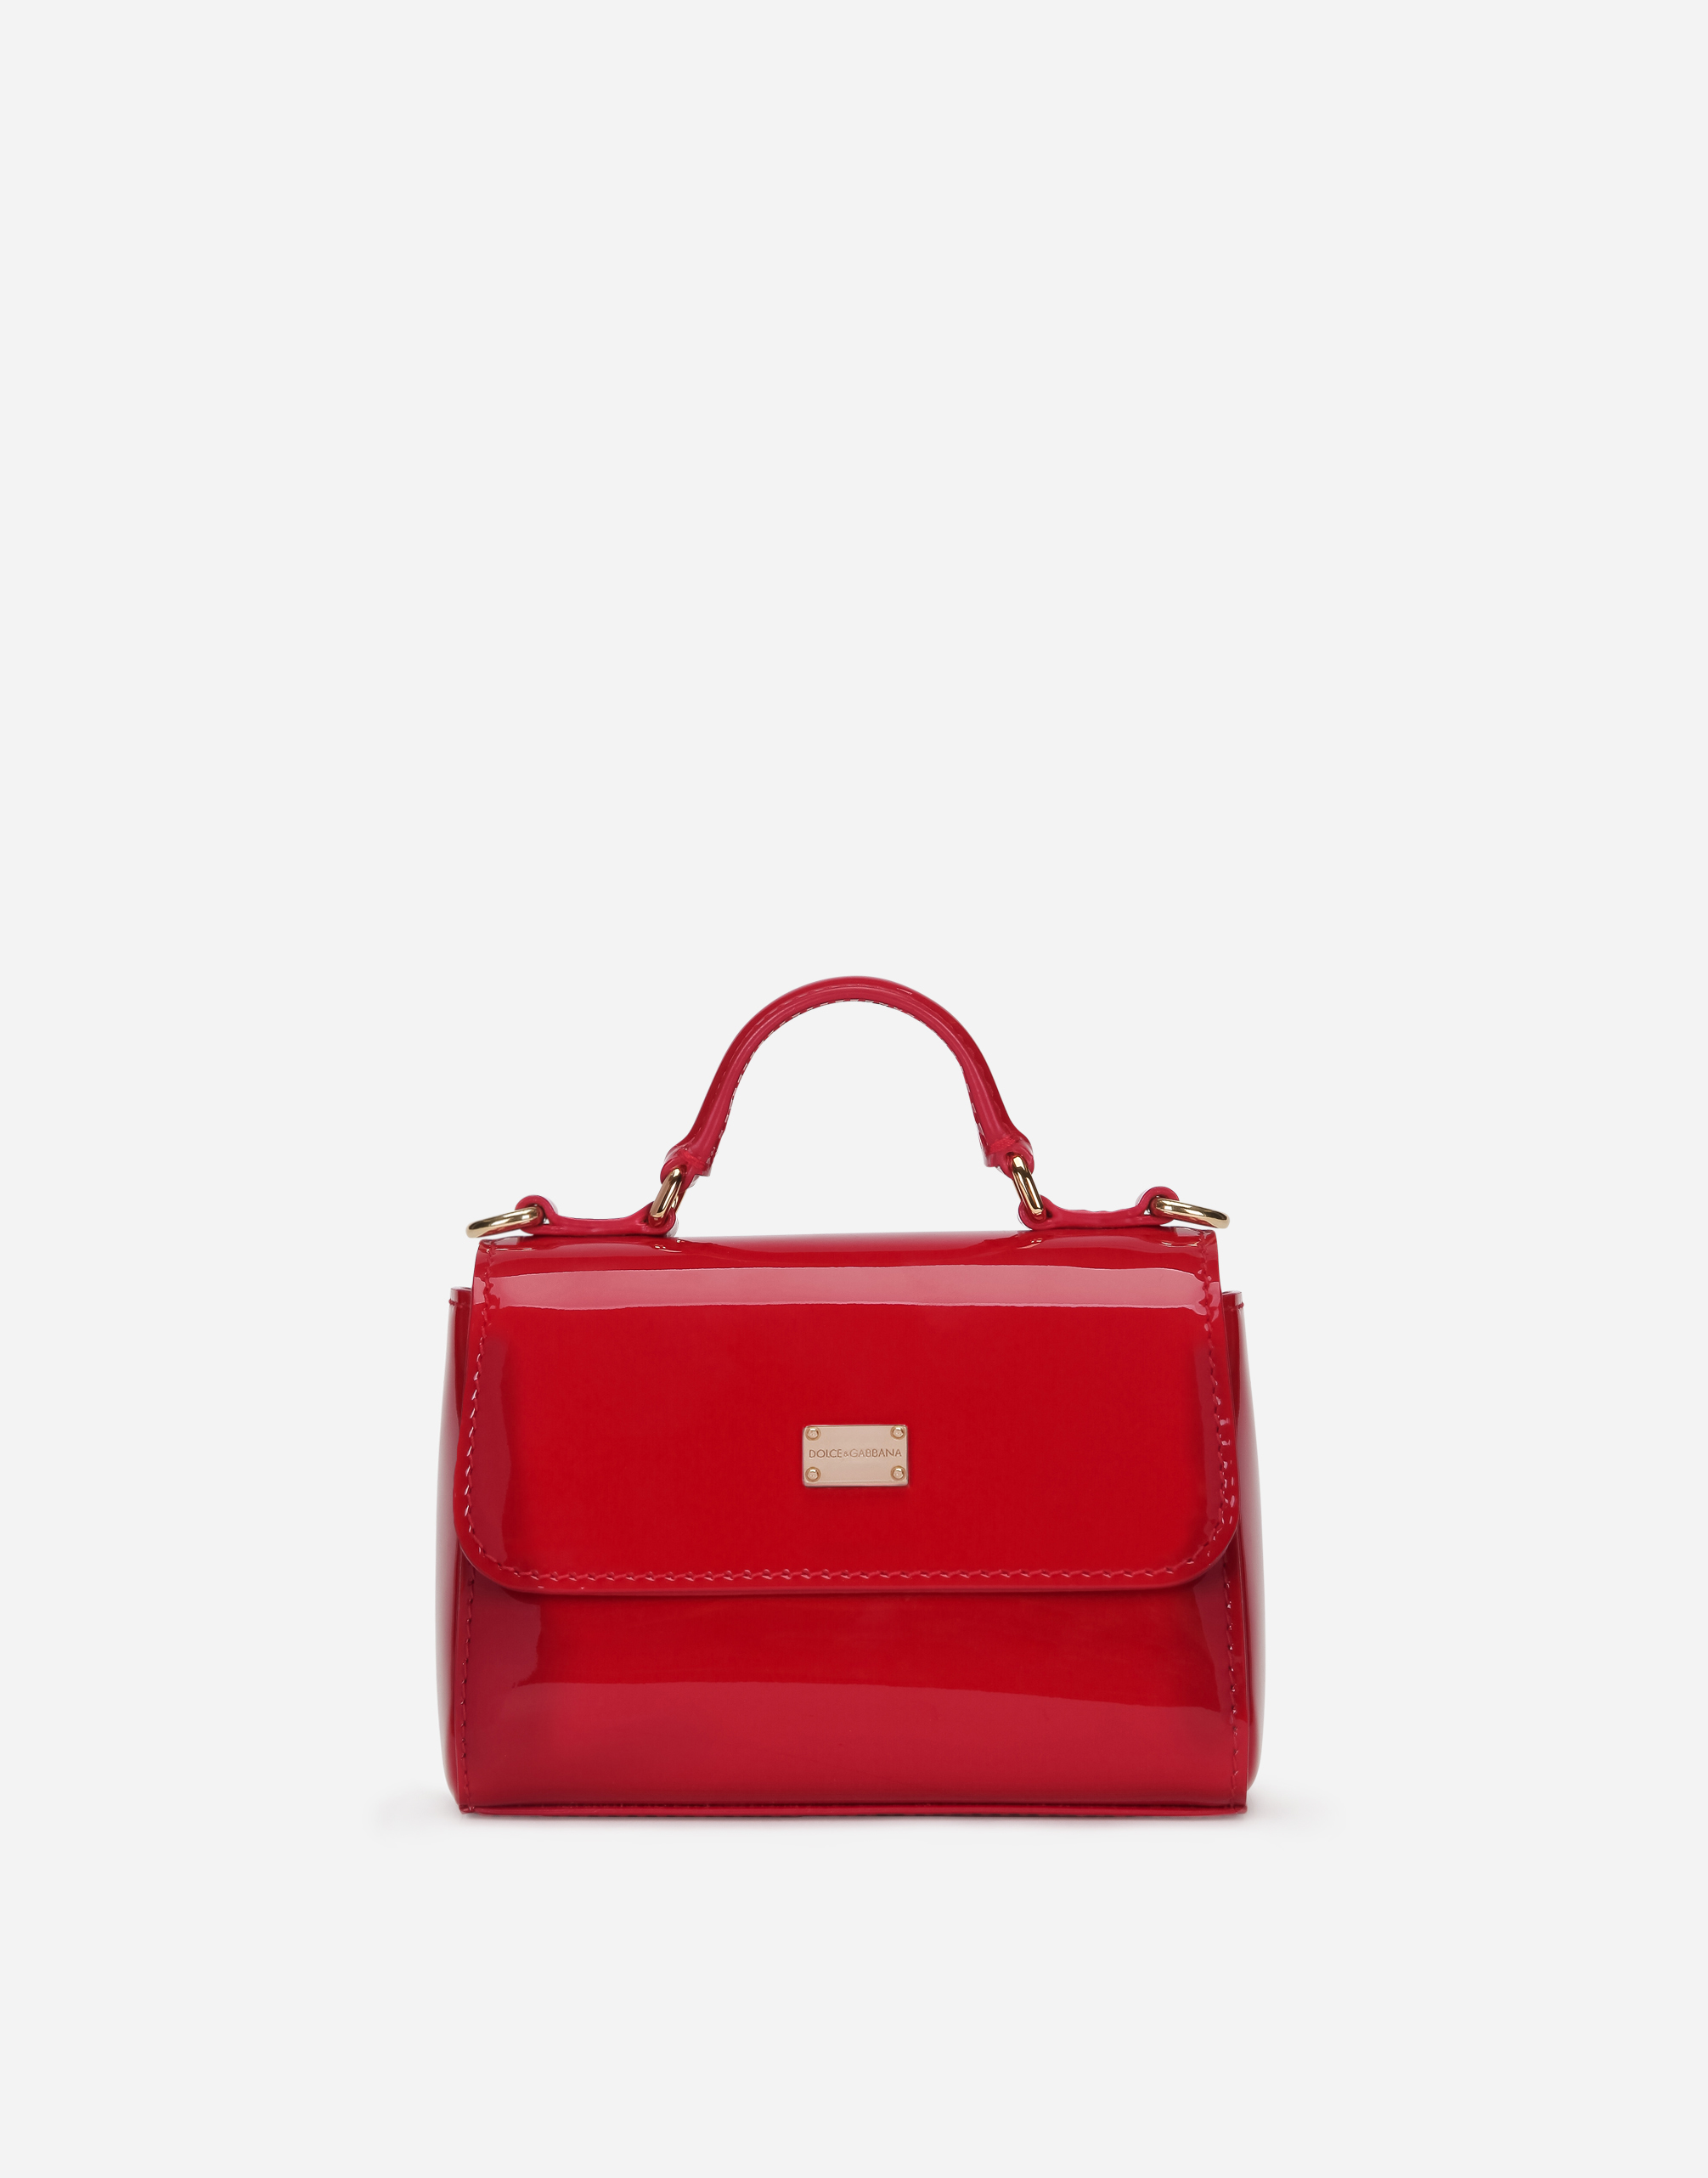 Patent leather handbag in Red